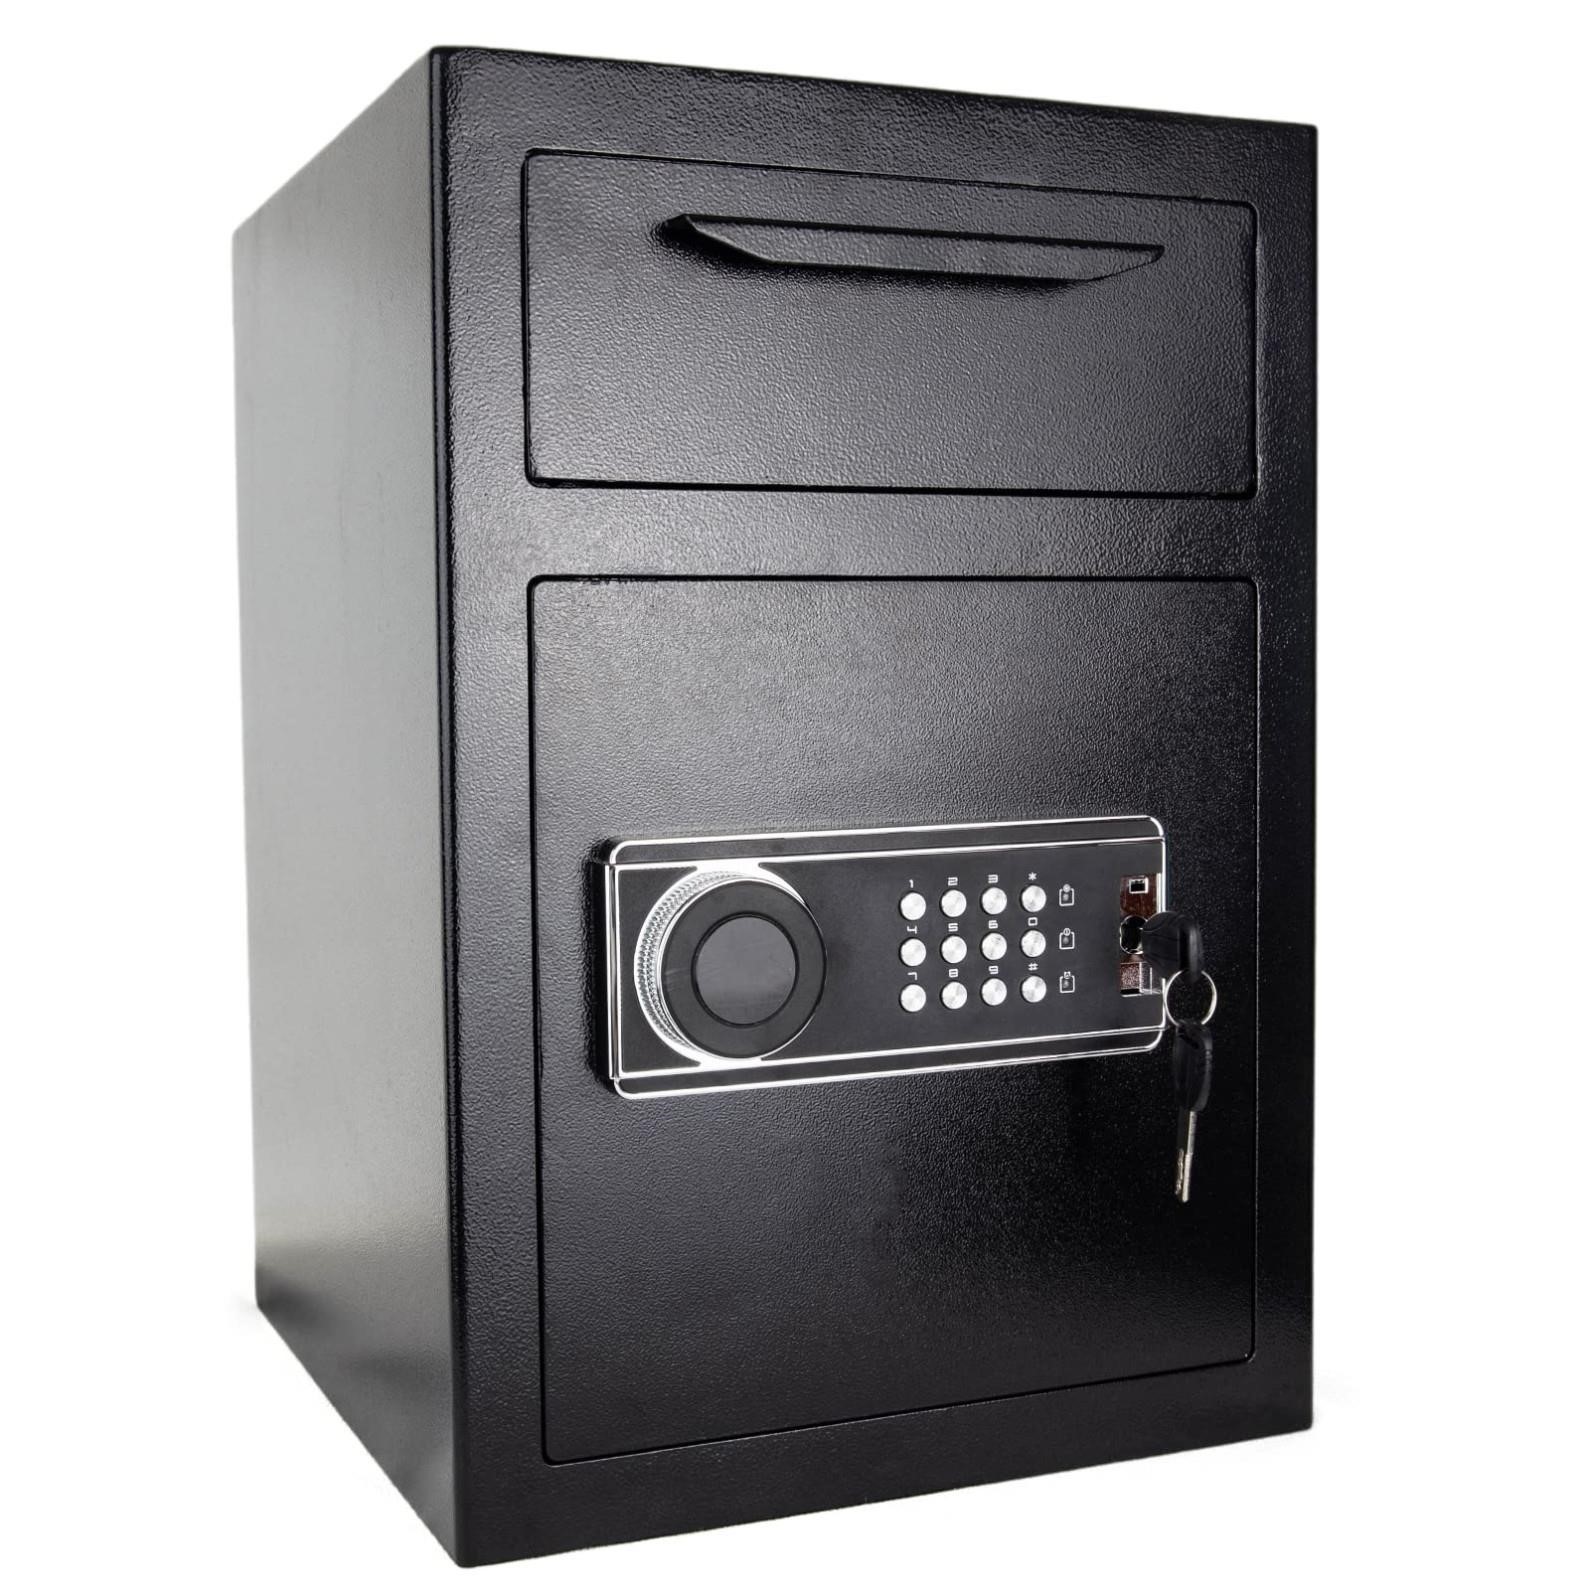 2.5 Cub Security Business Safe and Lock Box